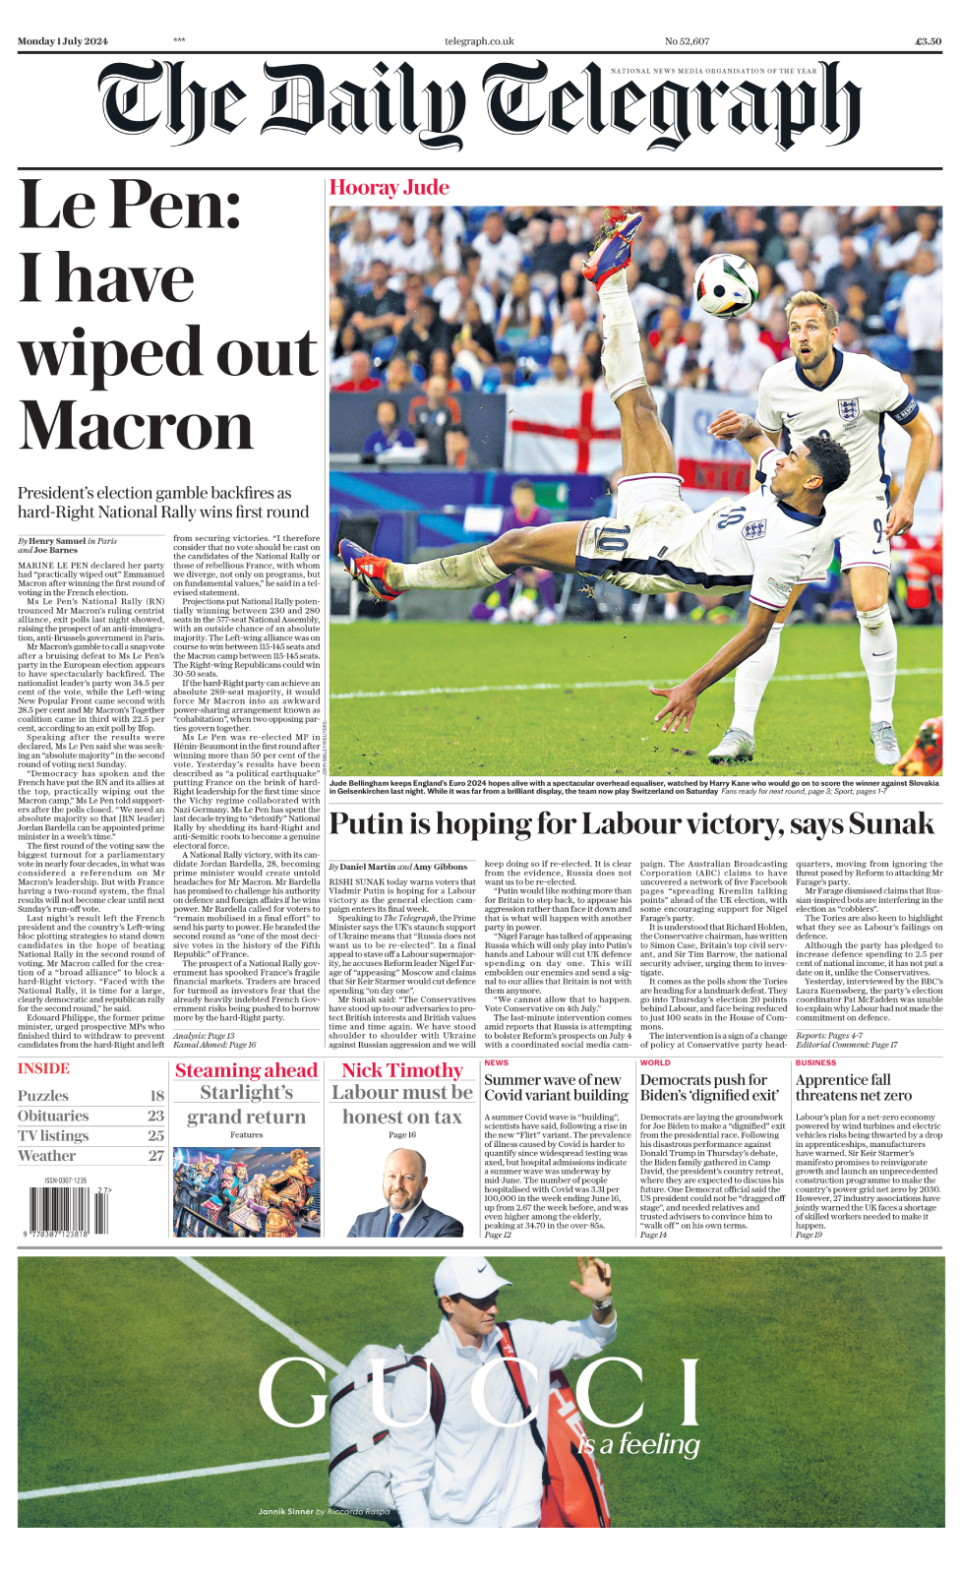 The headline on the front page of the Daily Telegraph reads: “Le Pen: I have wiped out Macron"